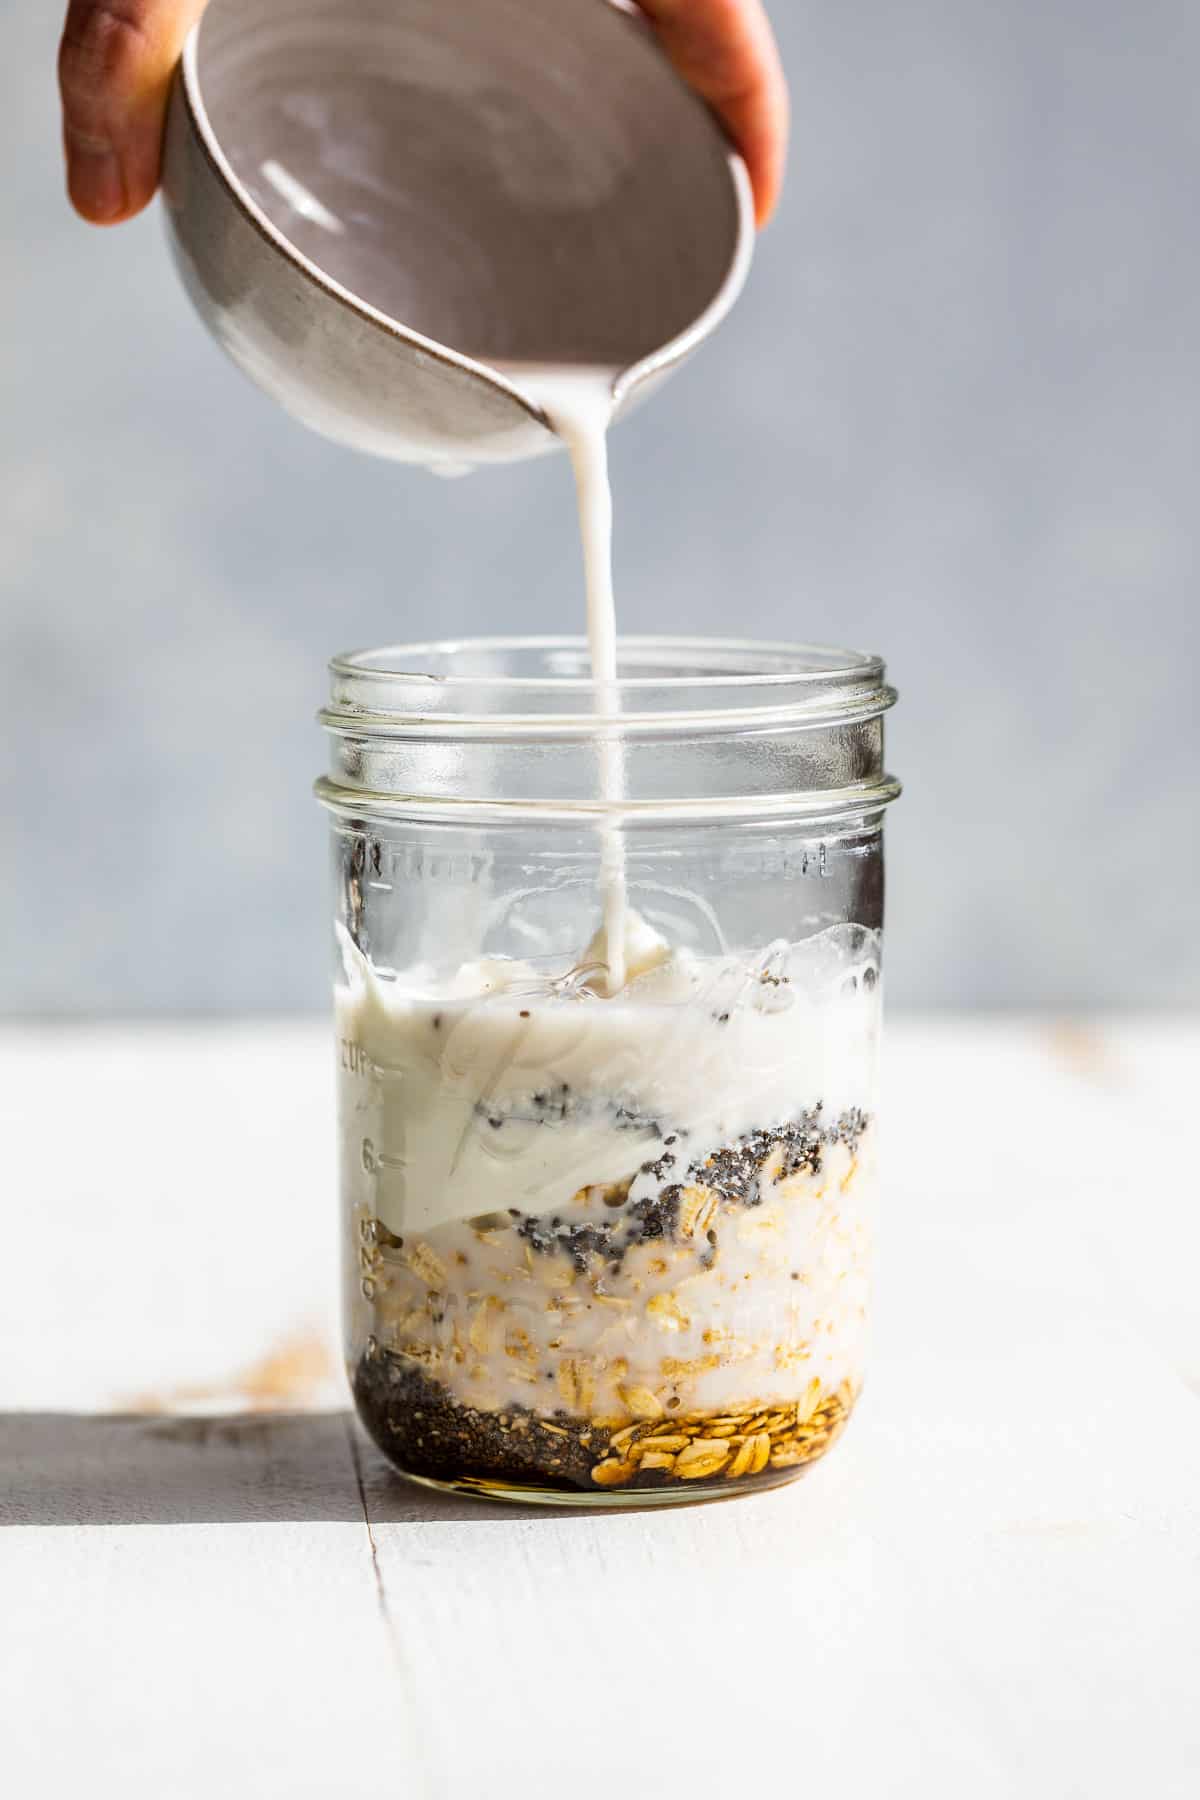 Adding the milk to the overnight oats ingredients in a mason jar.